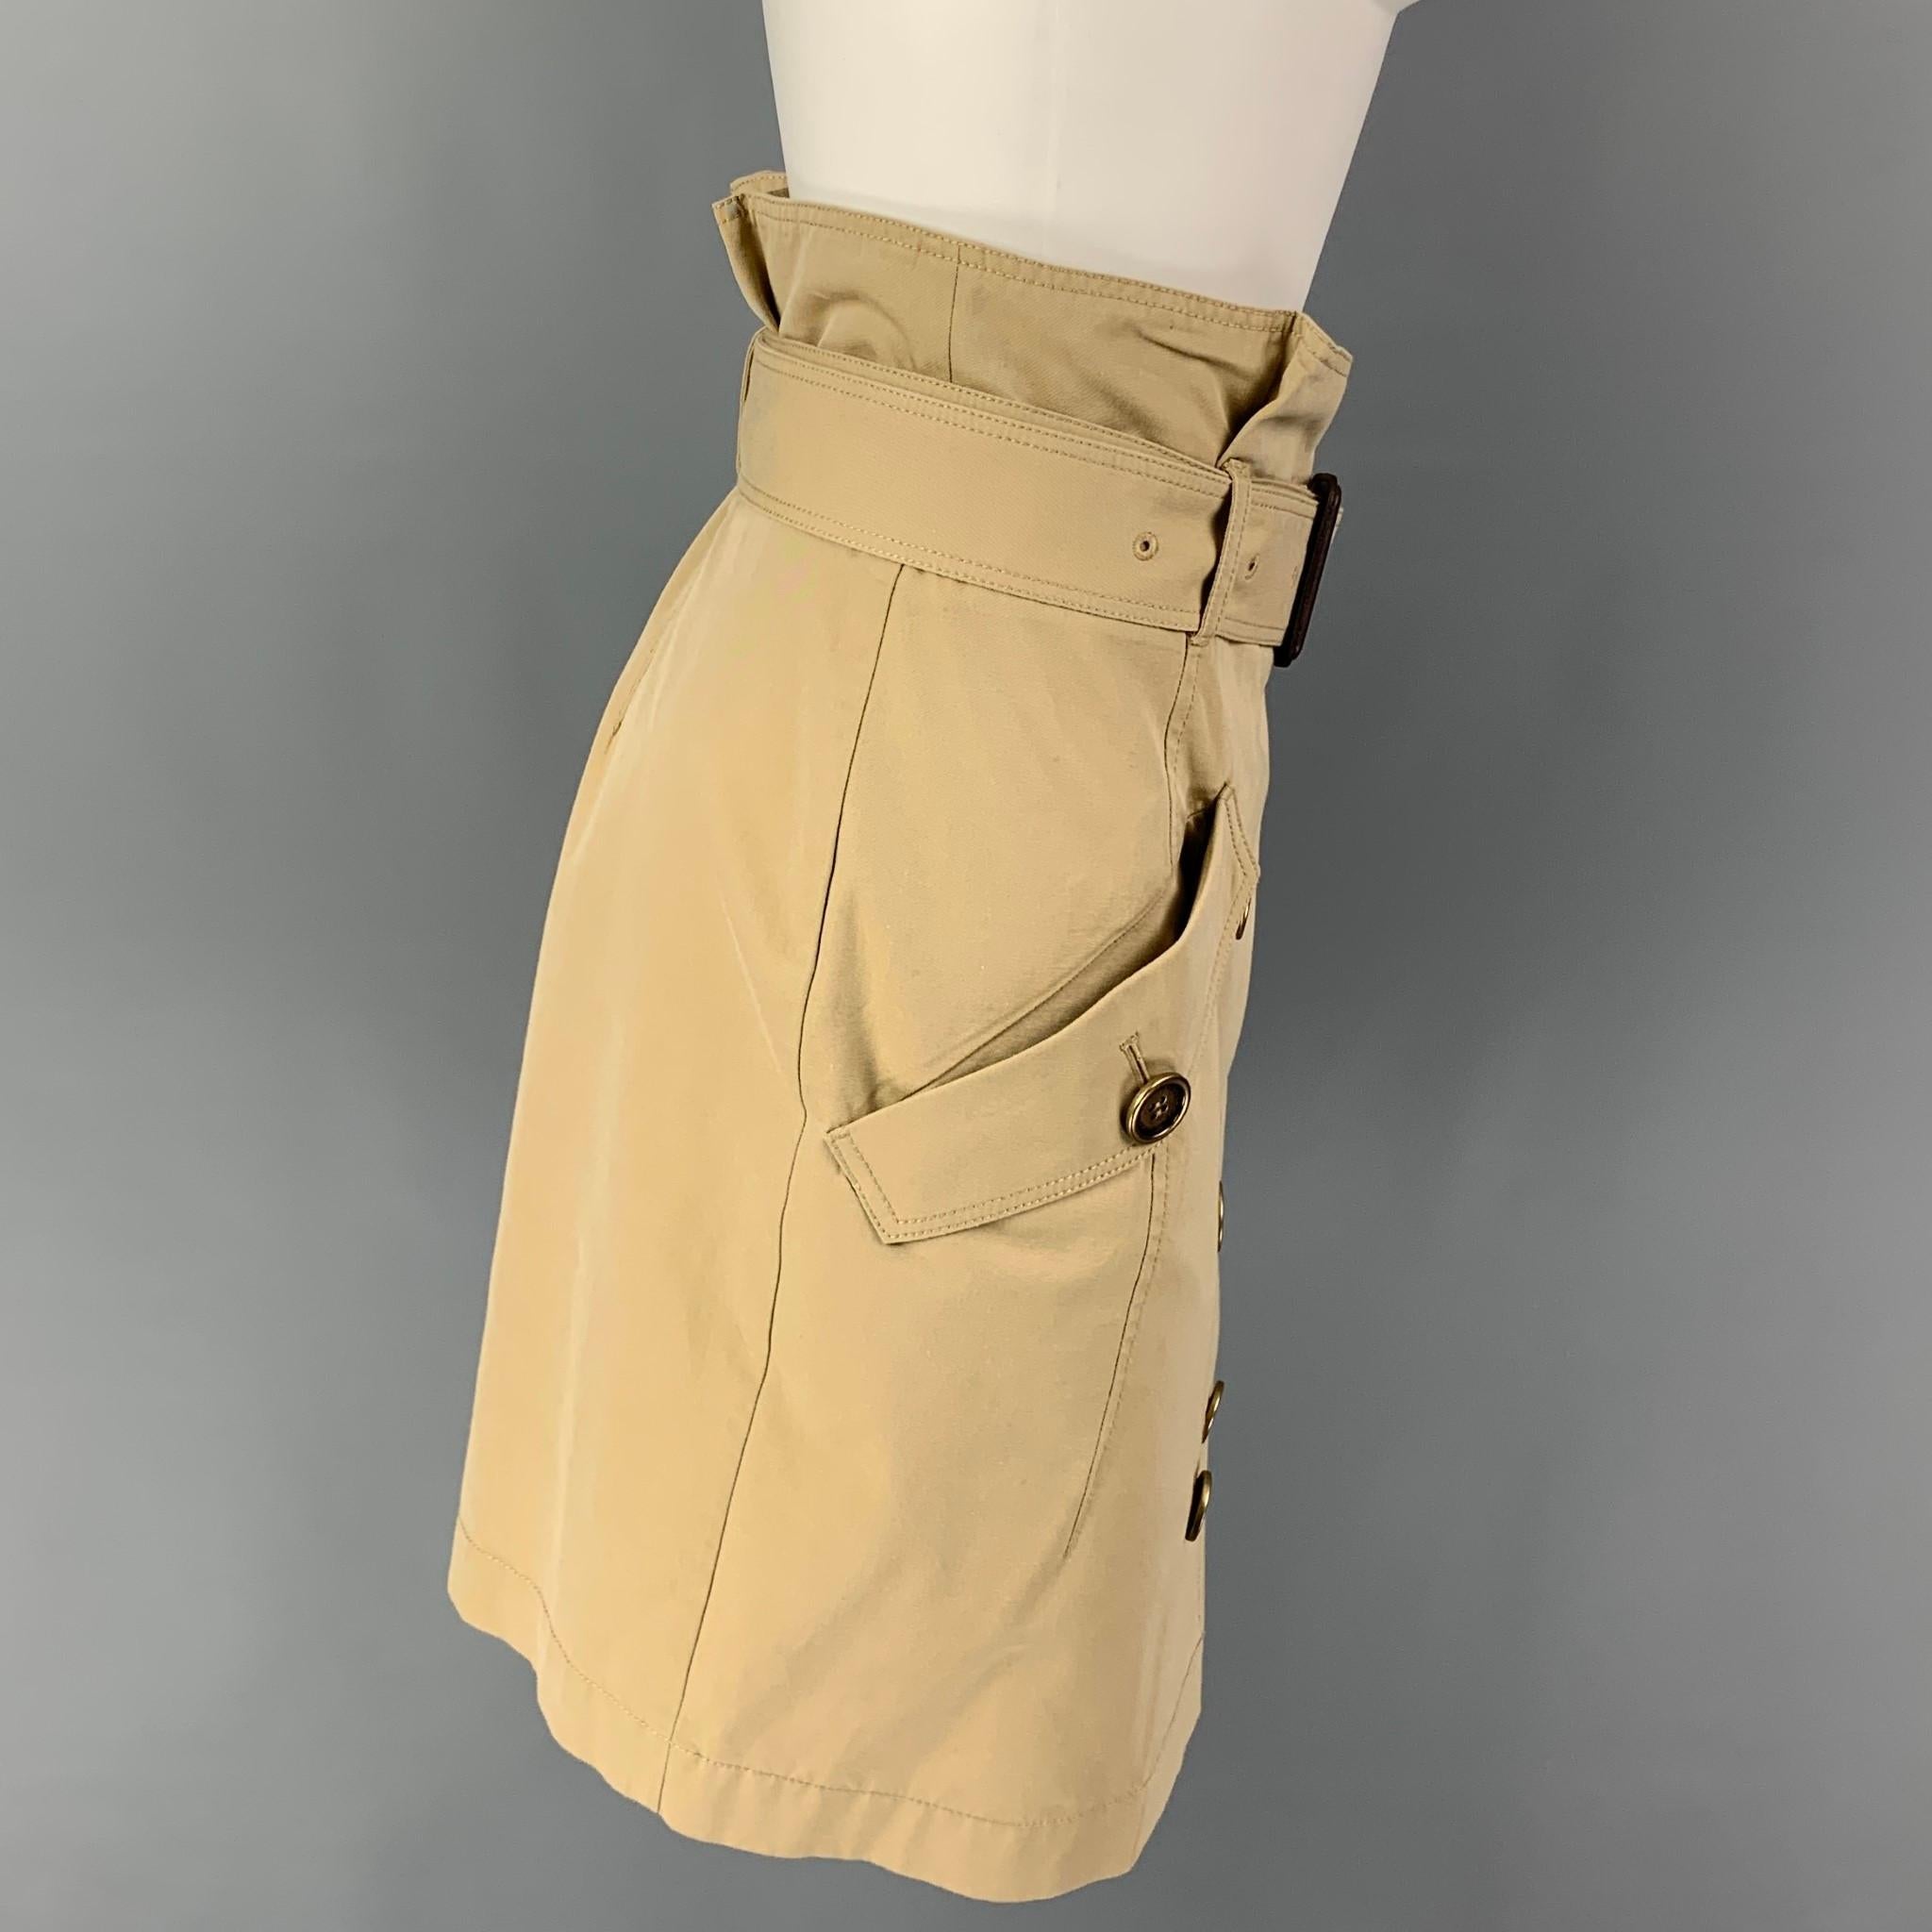 BURBERRY BRIT skirt comes in a khaki cotton featuring a belted style, flap pockets, and a double breasted closure. 

Very Good Pre-Owned Condition.
Marked: UK 8 / USA 6 / IT 40 / GER 36

Measurements:

Waist: 30 in.
Hip: 36 in.
Length: 22 in. 